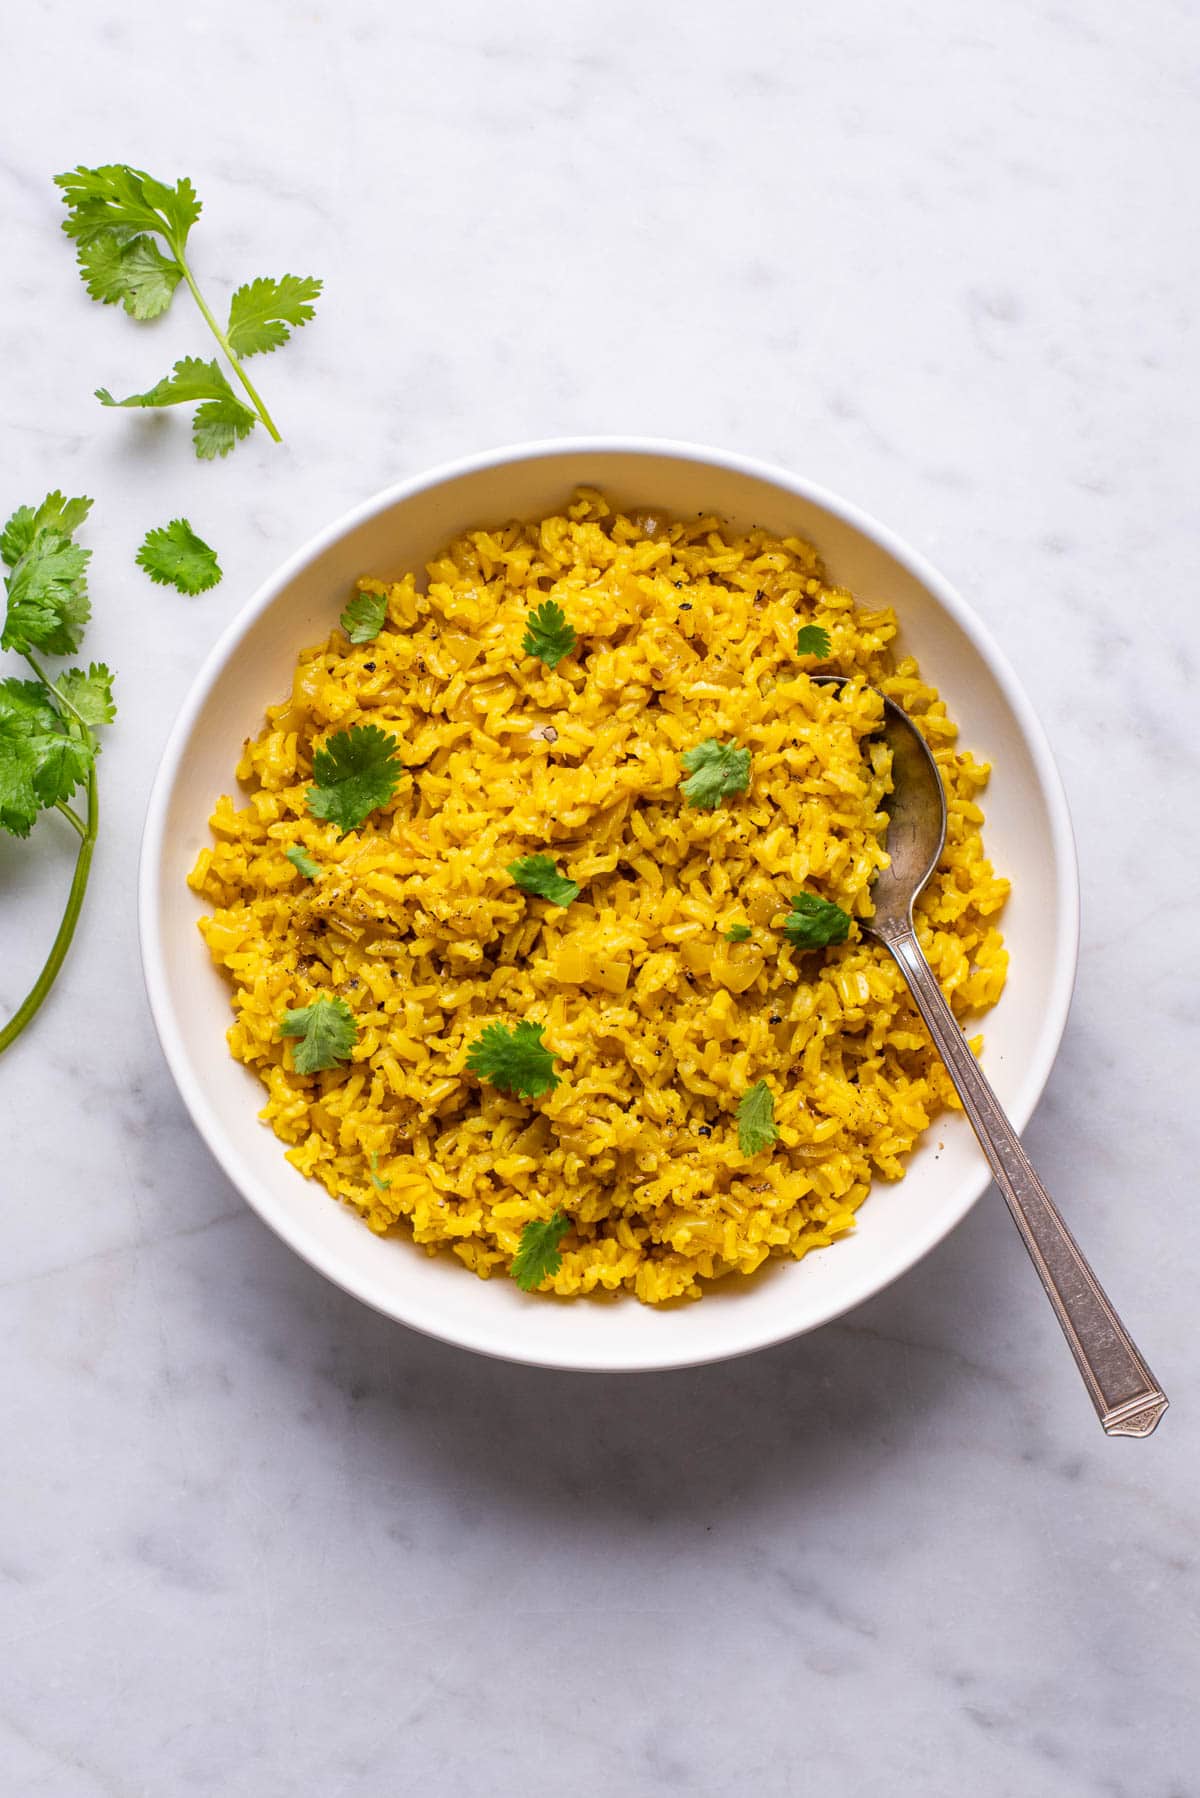 Turmeric rice in a white bowl garnished with cilantro.